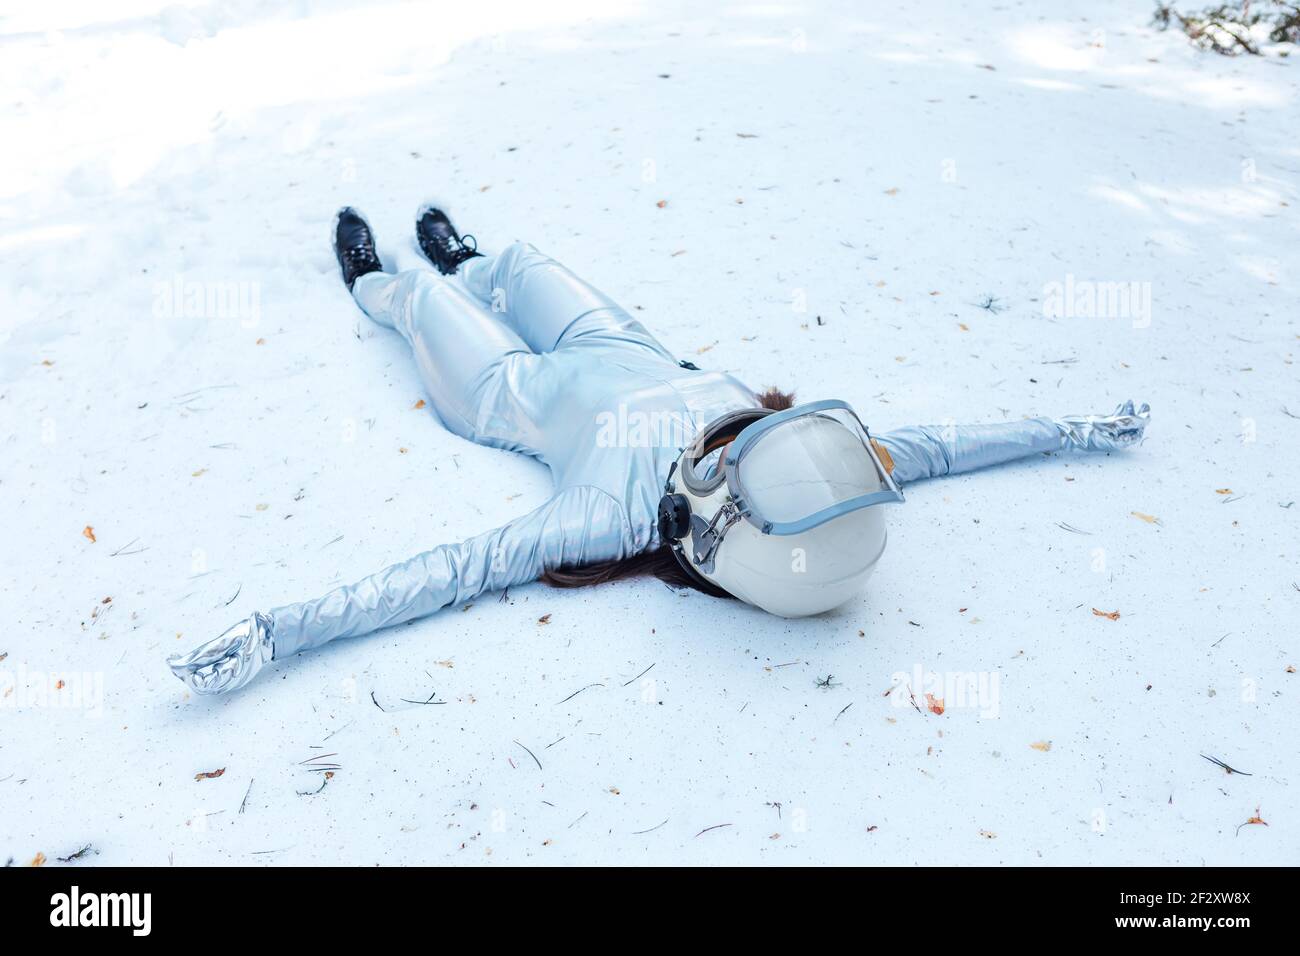 Full body fit calm spaceWoman in costume and helmet lying with arms outstretched on snowy glade in winter forest Stock Photo